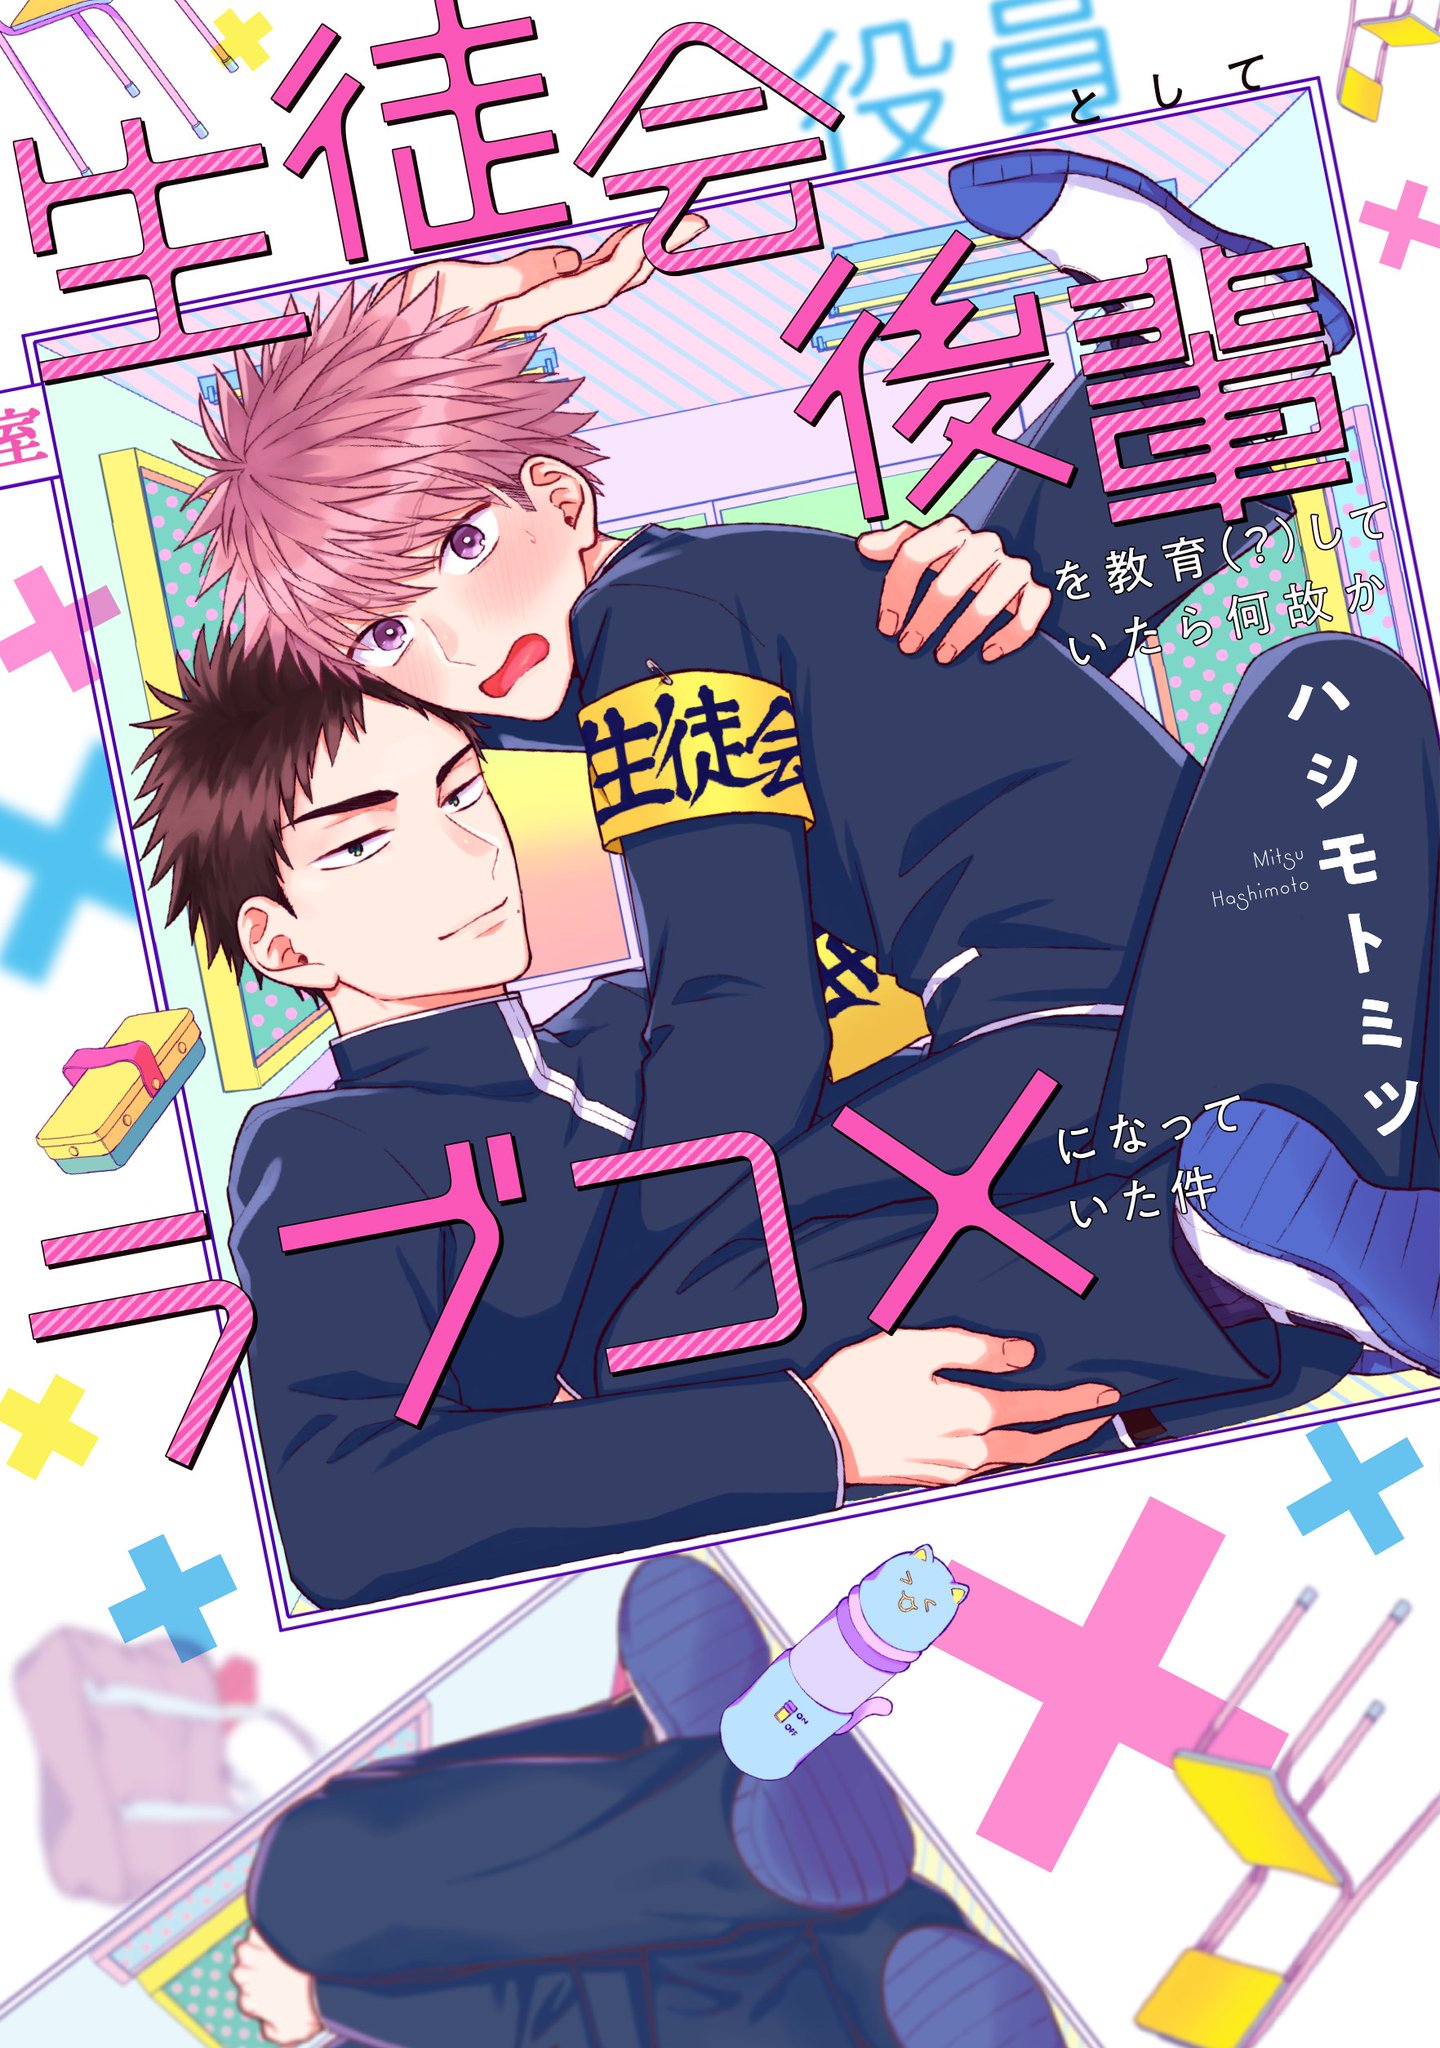 futekiya (Manga Planet BL Branch) on X: Our character of the day is Yuki  Shirasaki from At 25:00, in Akasaka by Hiroko Natsuno! Yuki is a rookie  actor who will do what